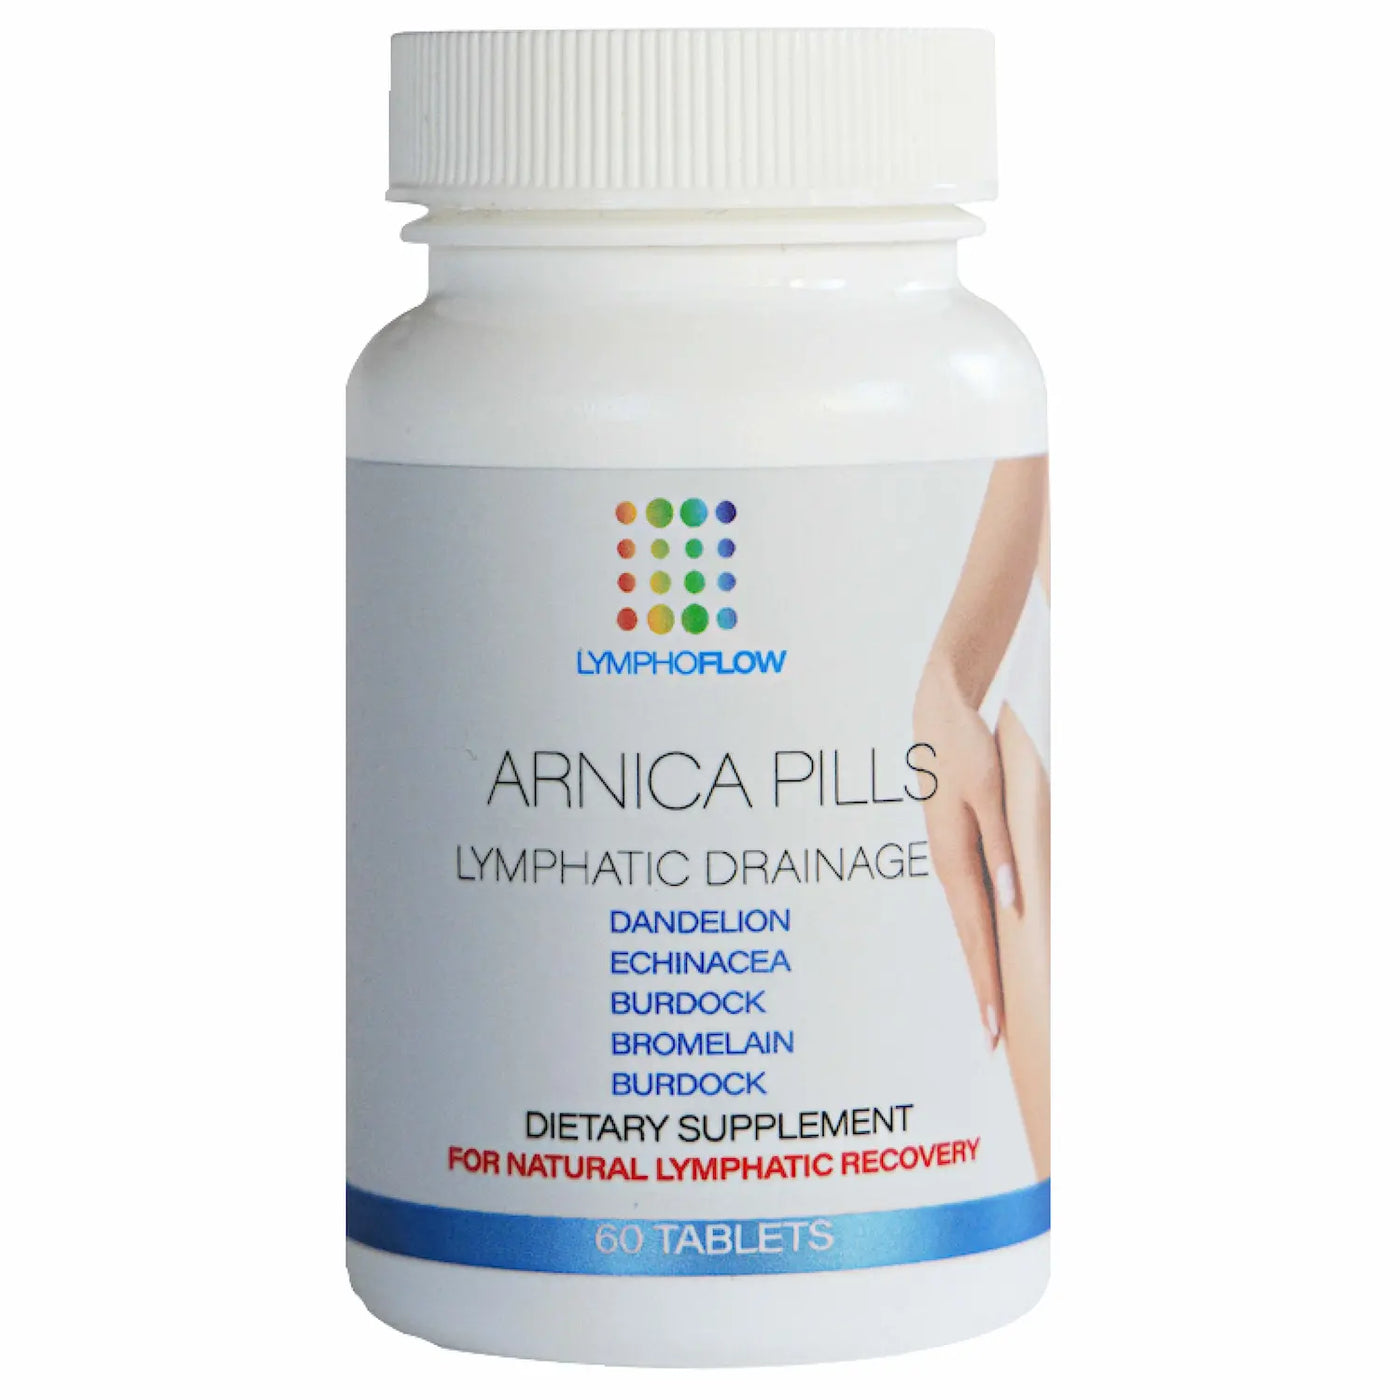 ARNICA PILLS WITH LYMPHATIC DRAINAGE HERBAL BLEND